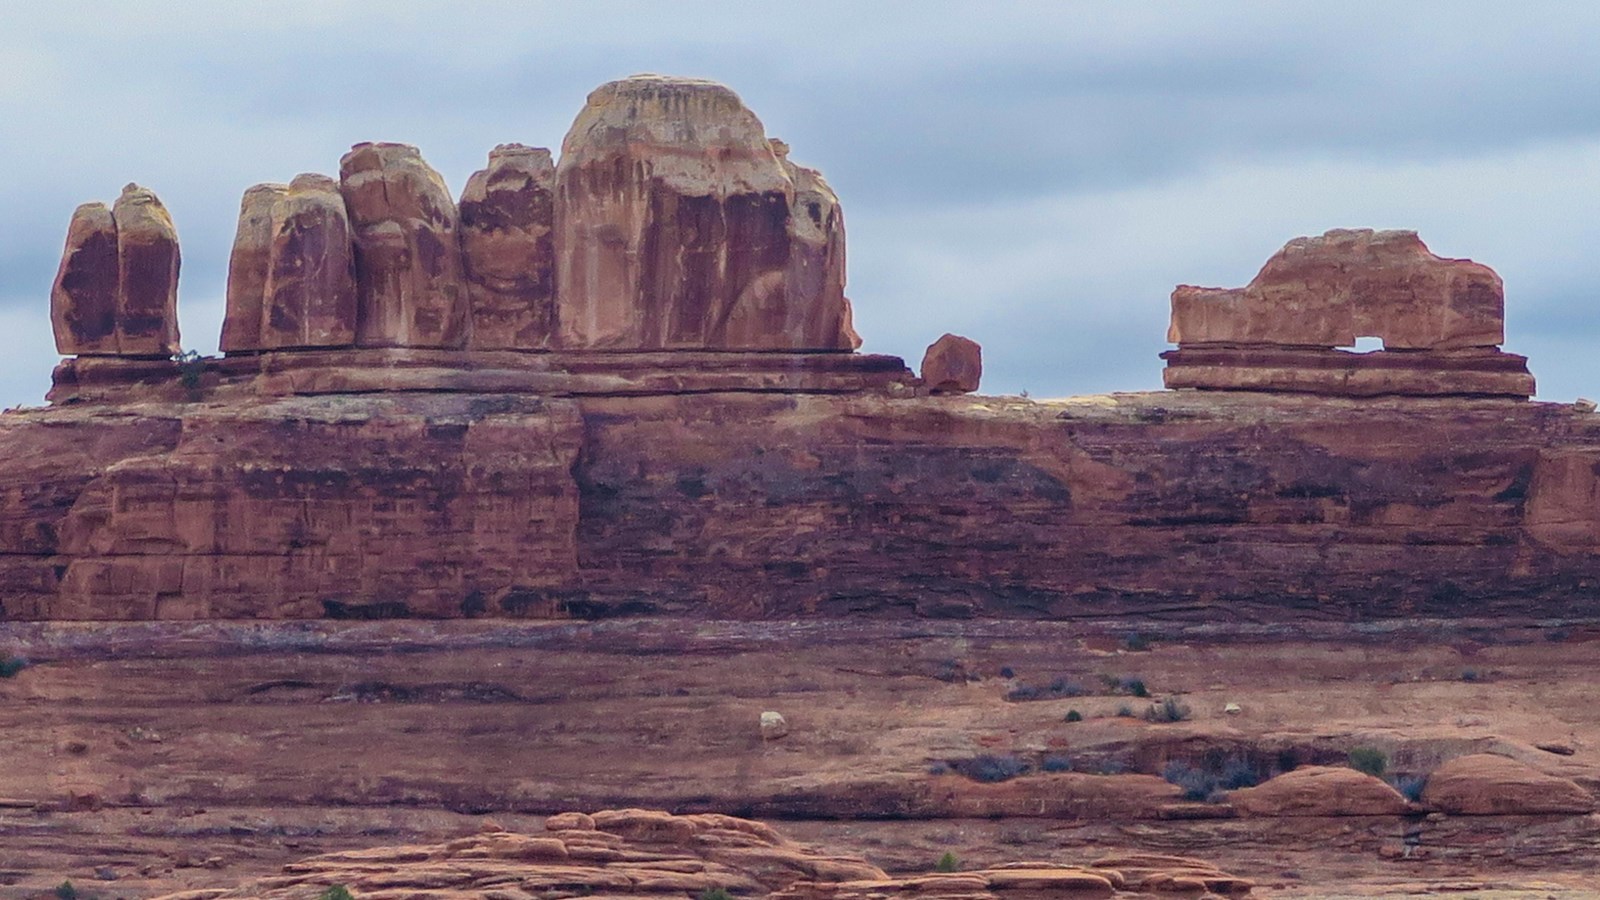 A sandstone feature that resembles a wooden clog shoe sits atop a canyon wall